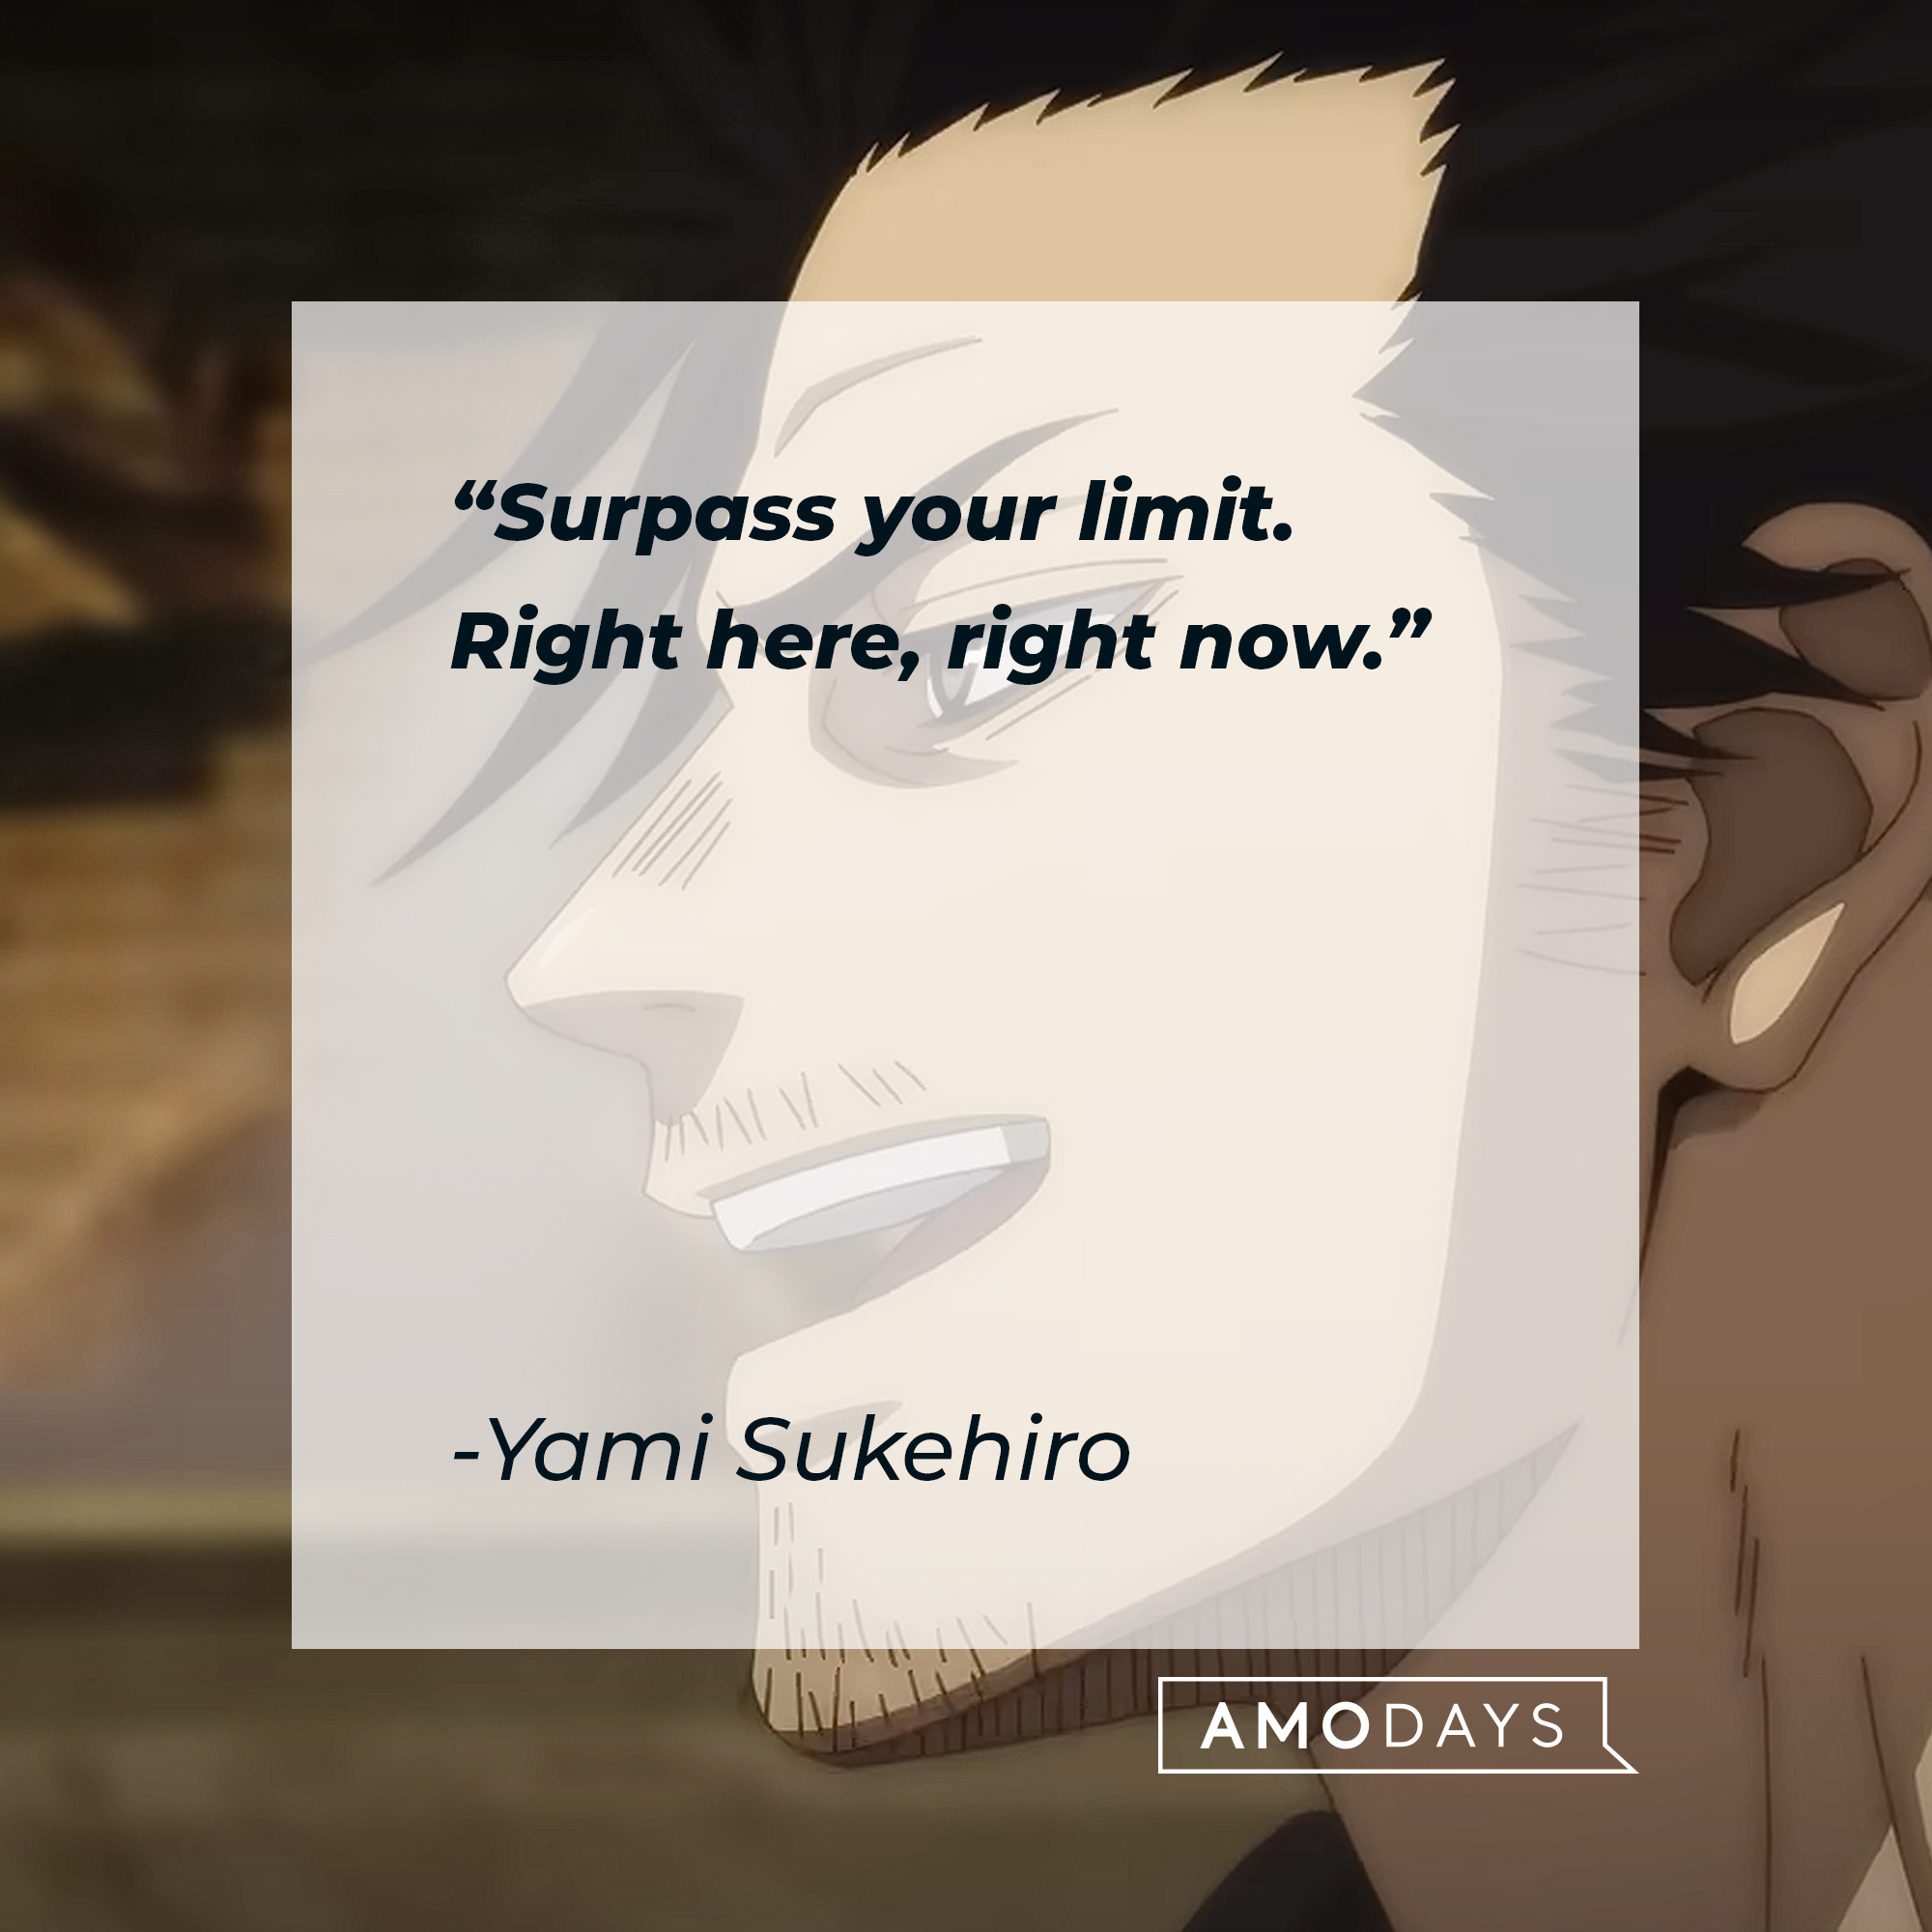 An image of Yami Sukehiro with his quote: “Surpass your limit. Right here, right now.” | Source: youtube/netflixanime